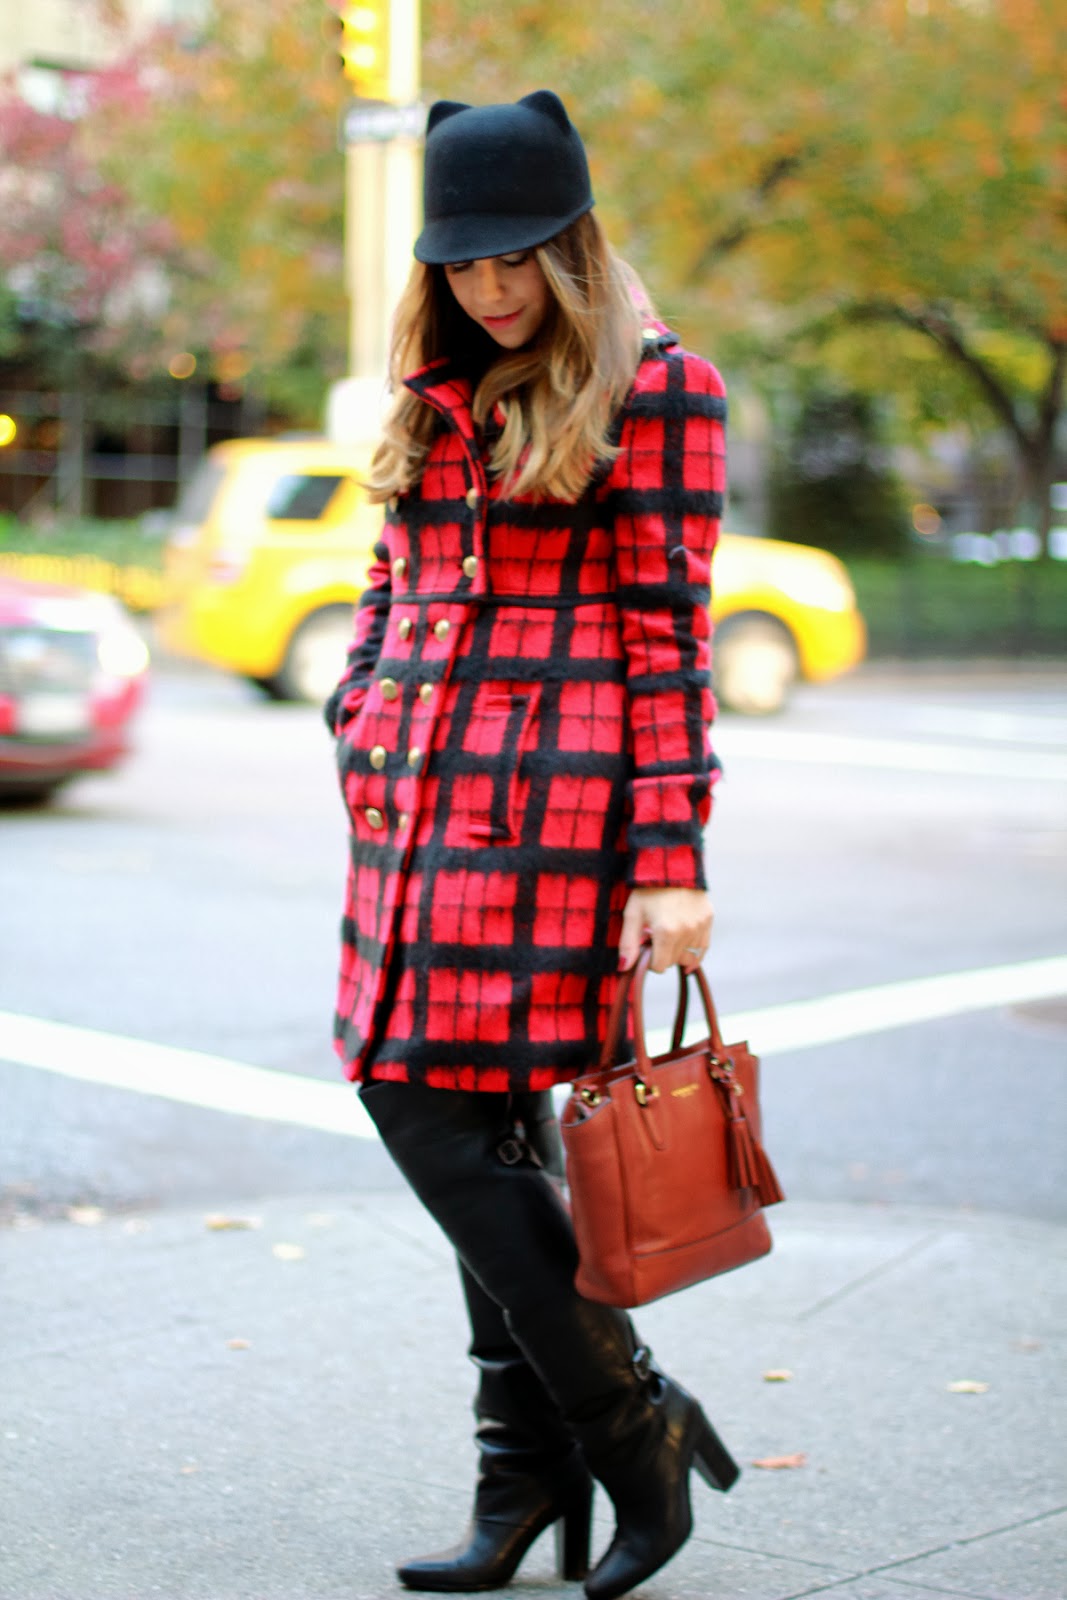 The Corporate Catwalk by Olivia : Red Plaid Coat & Black Boots